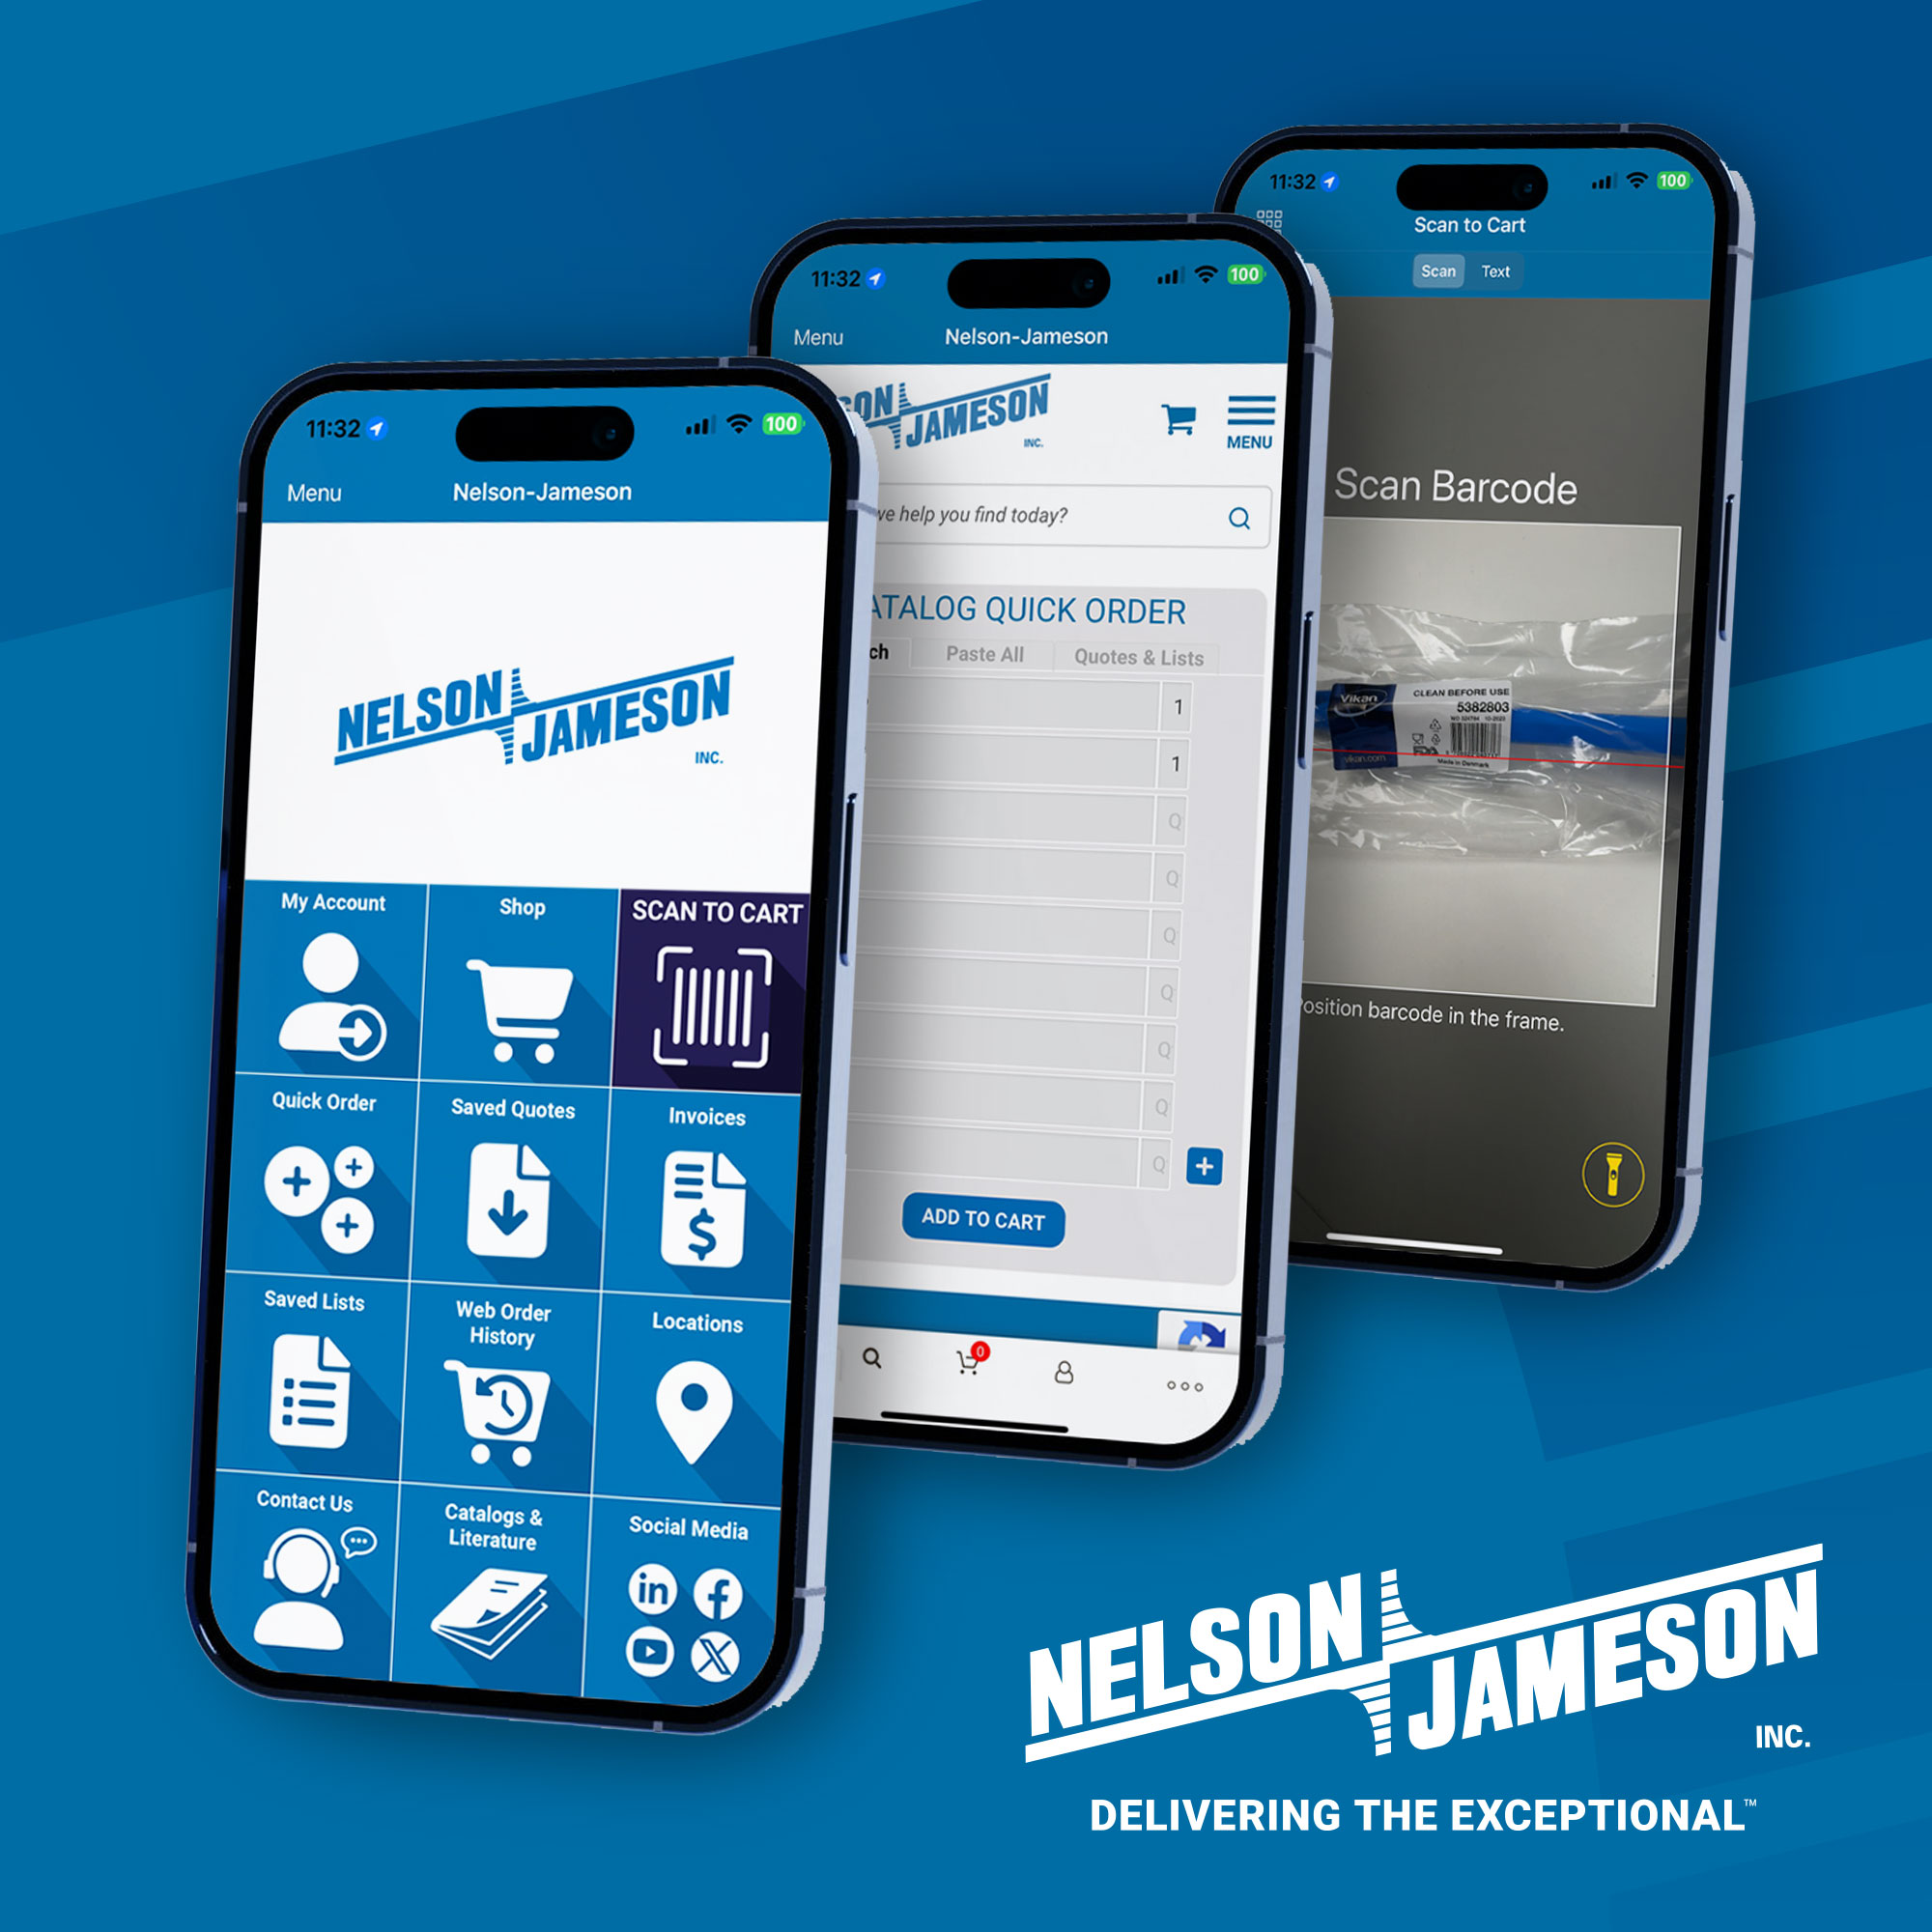 Food Processing Distributor Nelson-Jameson Launches New Customer-Centric Mobile App